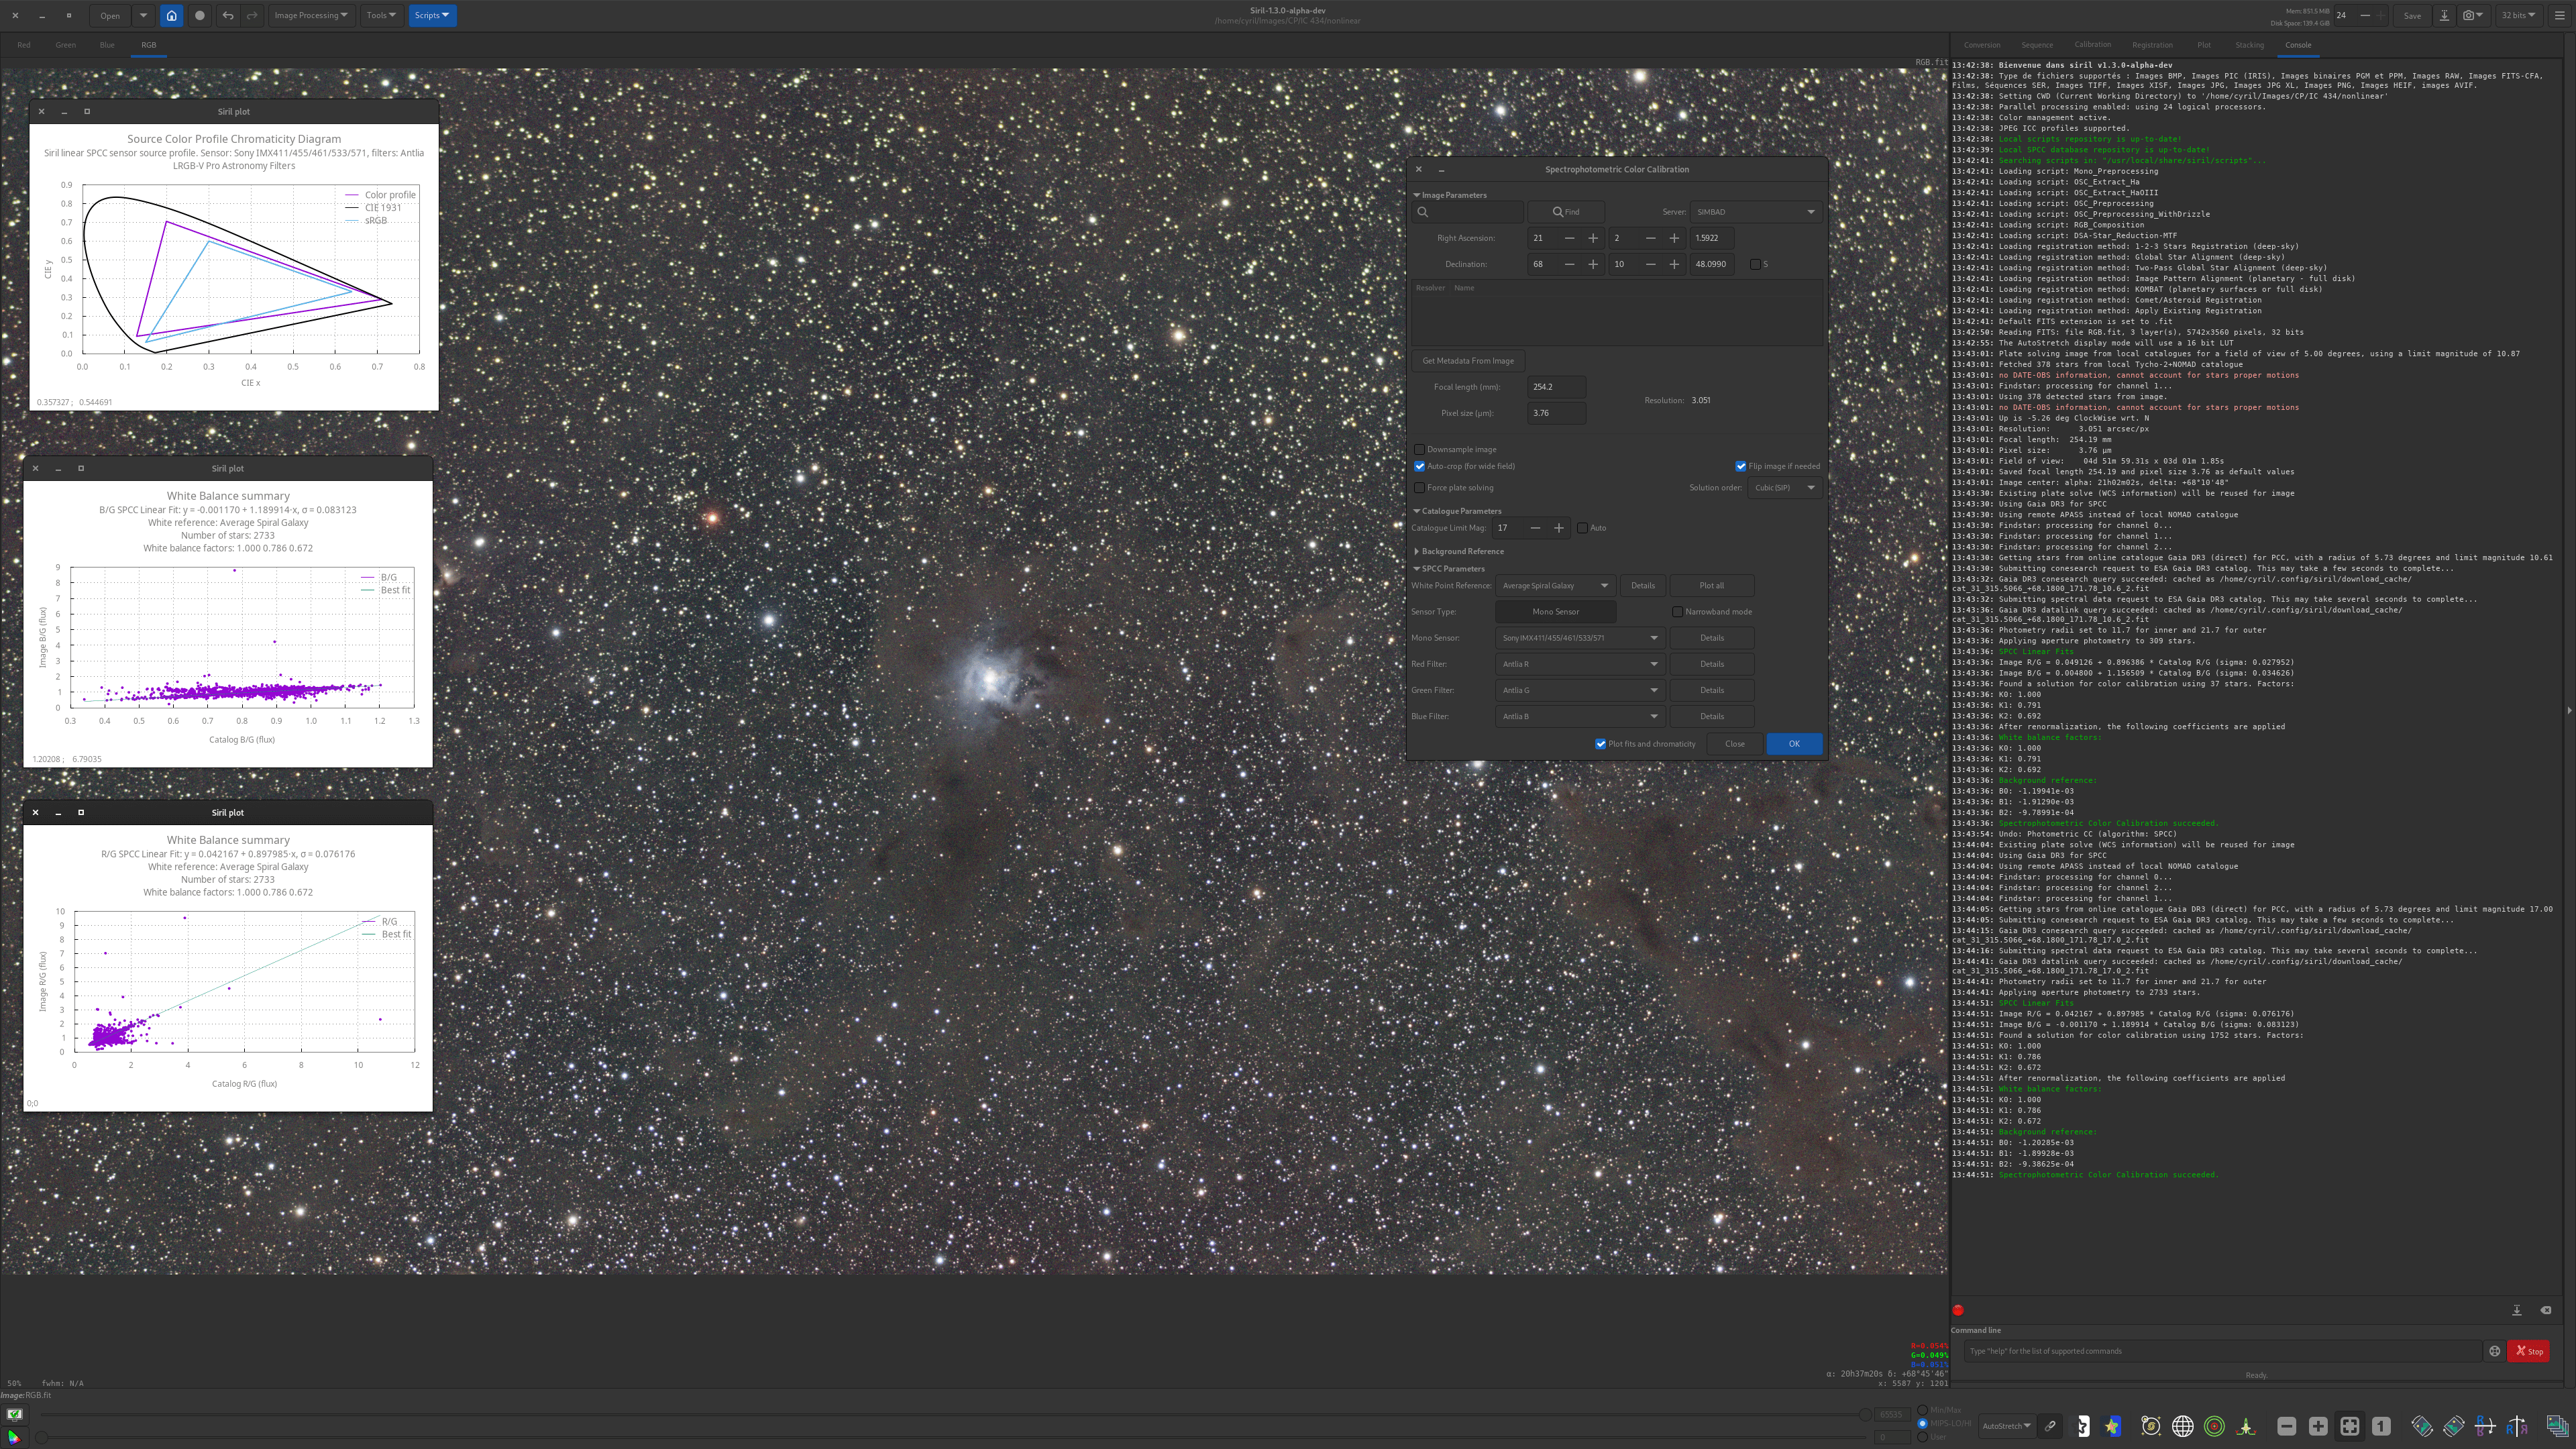 Example of use of the spectrophotometry color calibration tool, using stars up to magnitude 17.